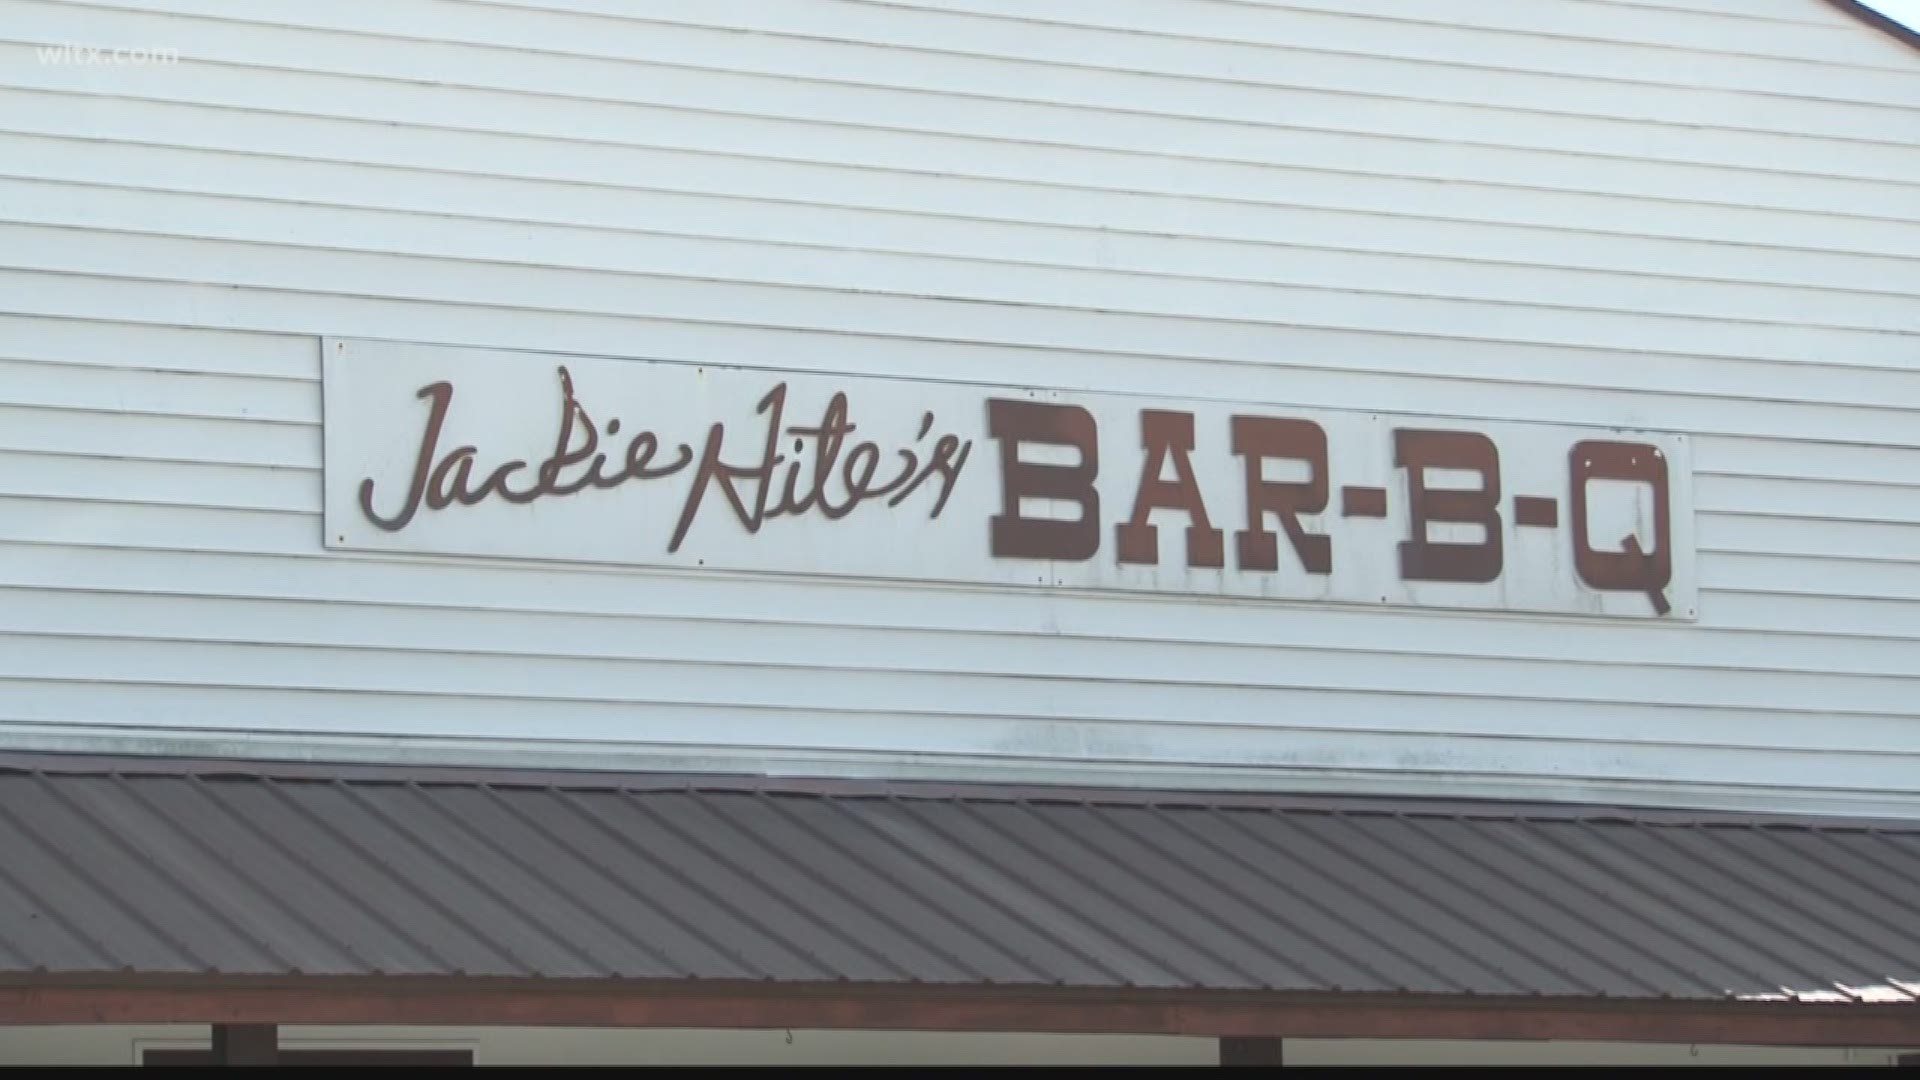 A Batesburg-Leesville restaurant closed its doors Sunday after nearly 40 years in business.